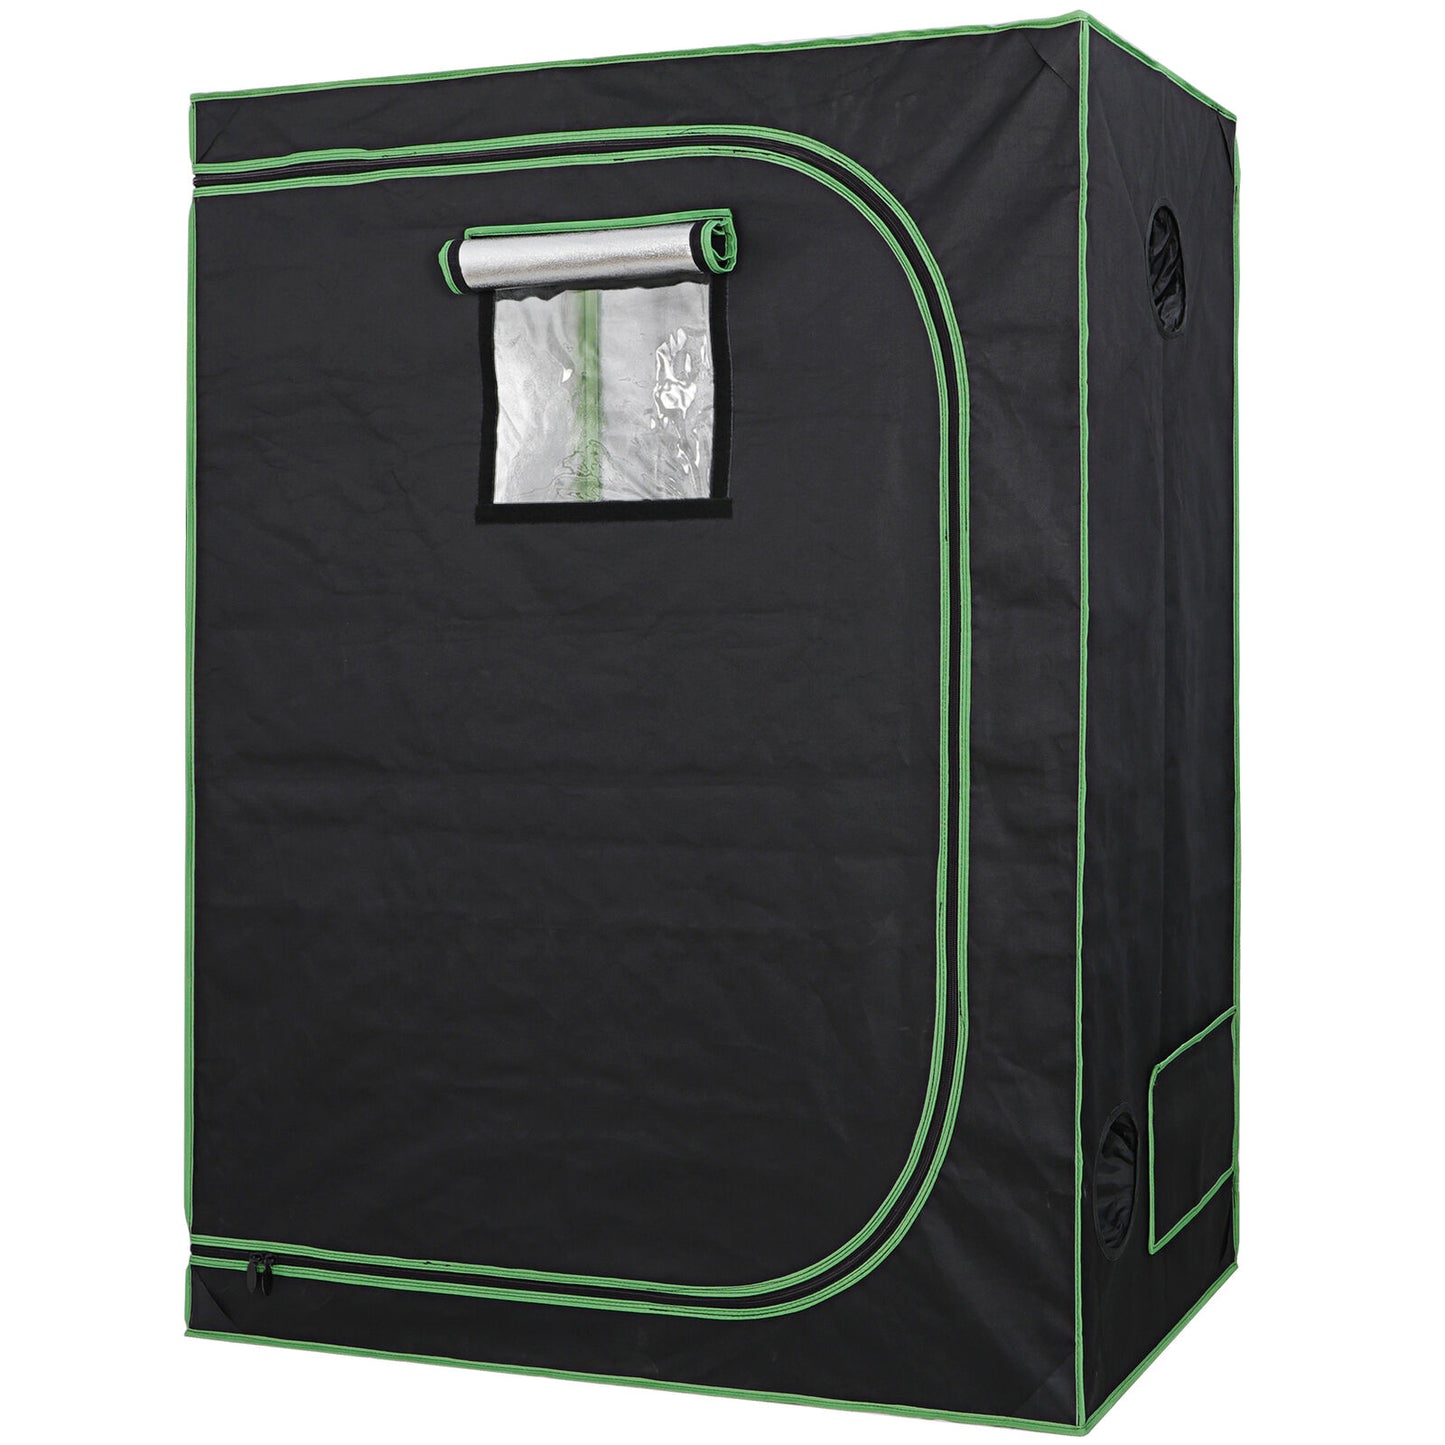 48"x24"x60" Hydroponic Grow Tent with Observation Window Floor Tray for Plant